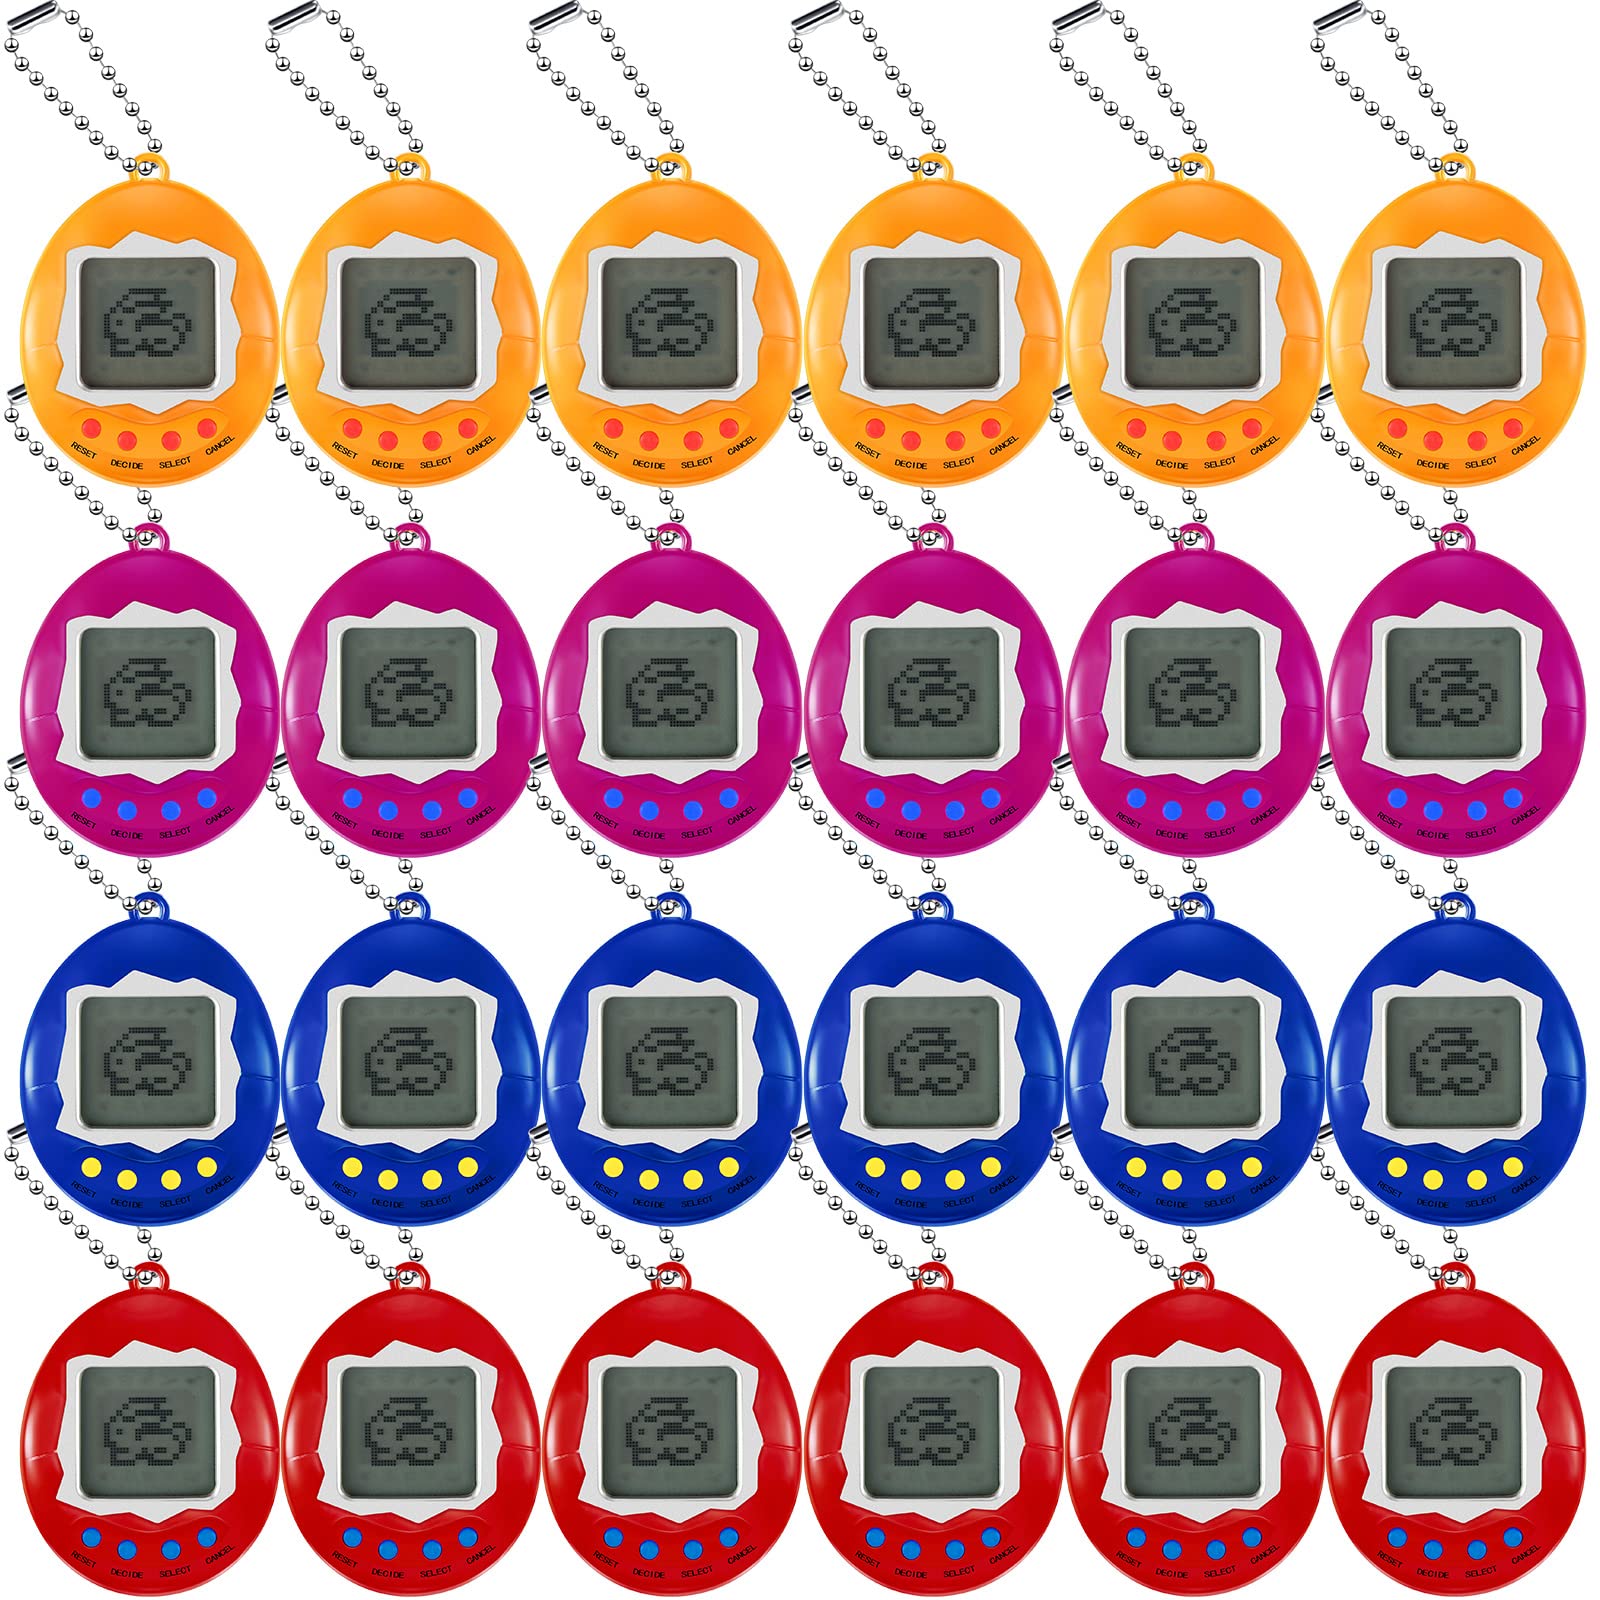 Lewtemi 24 Pieces Virtual Pet Keychains for Kids Electronic Digital Pets 168 Pets Retro Handheld Game Machine Nostalgic 90s Toy for Halloween Christmas